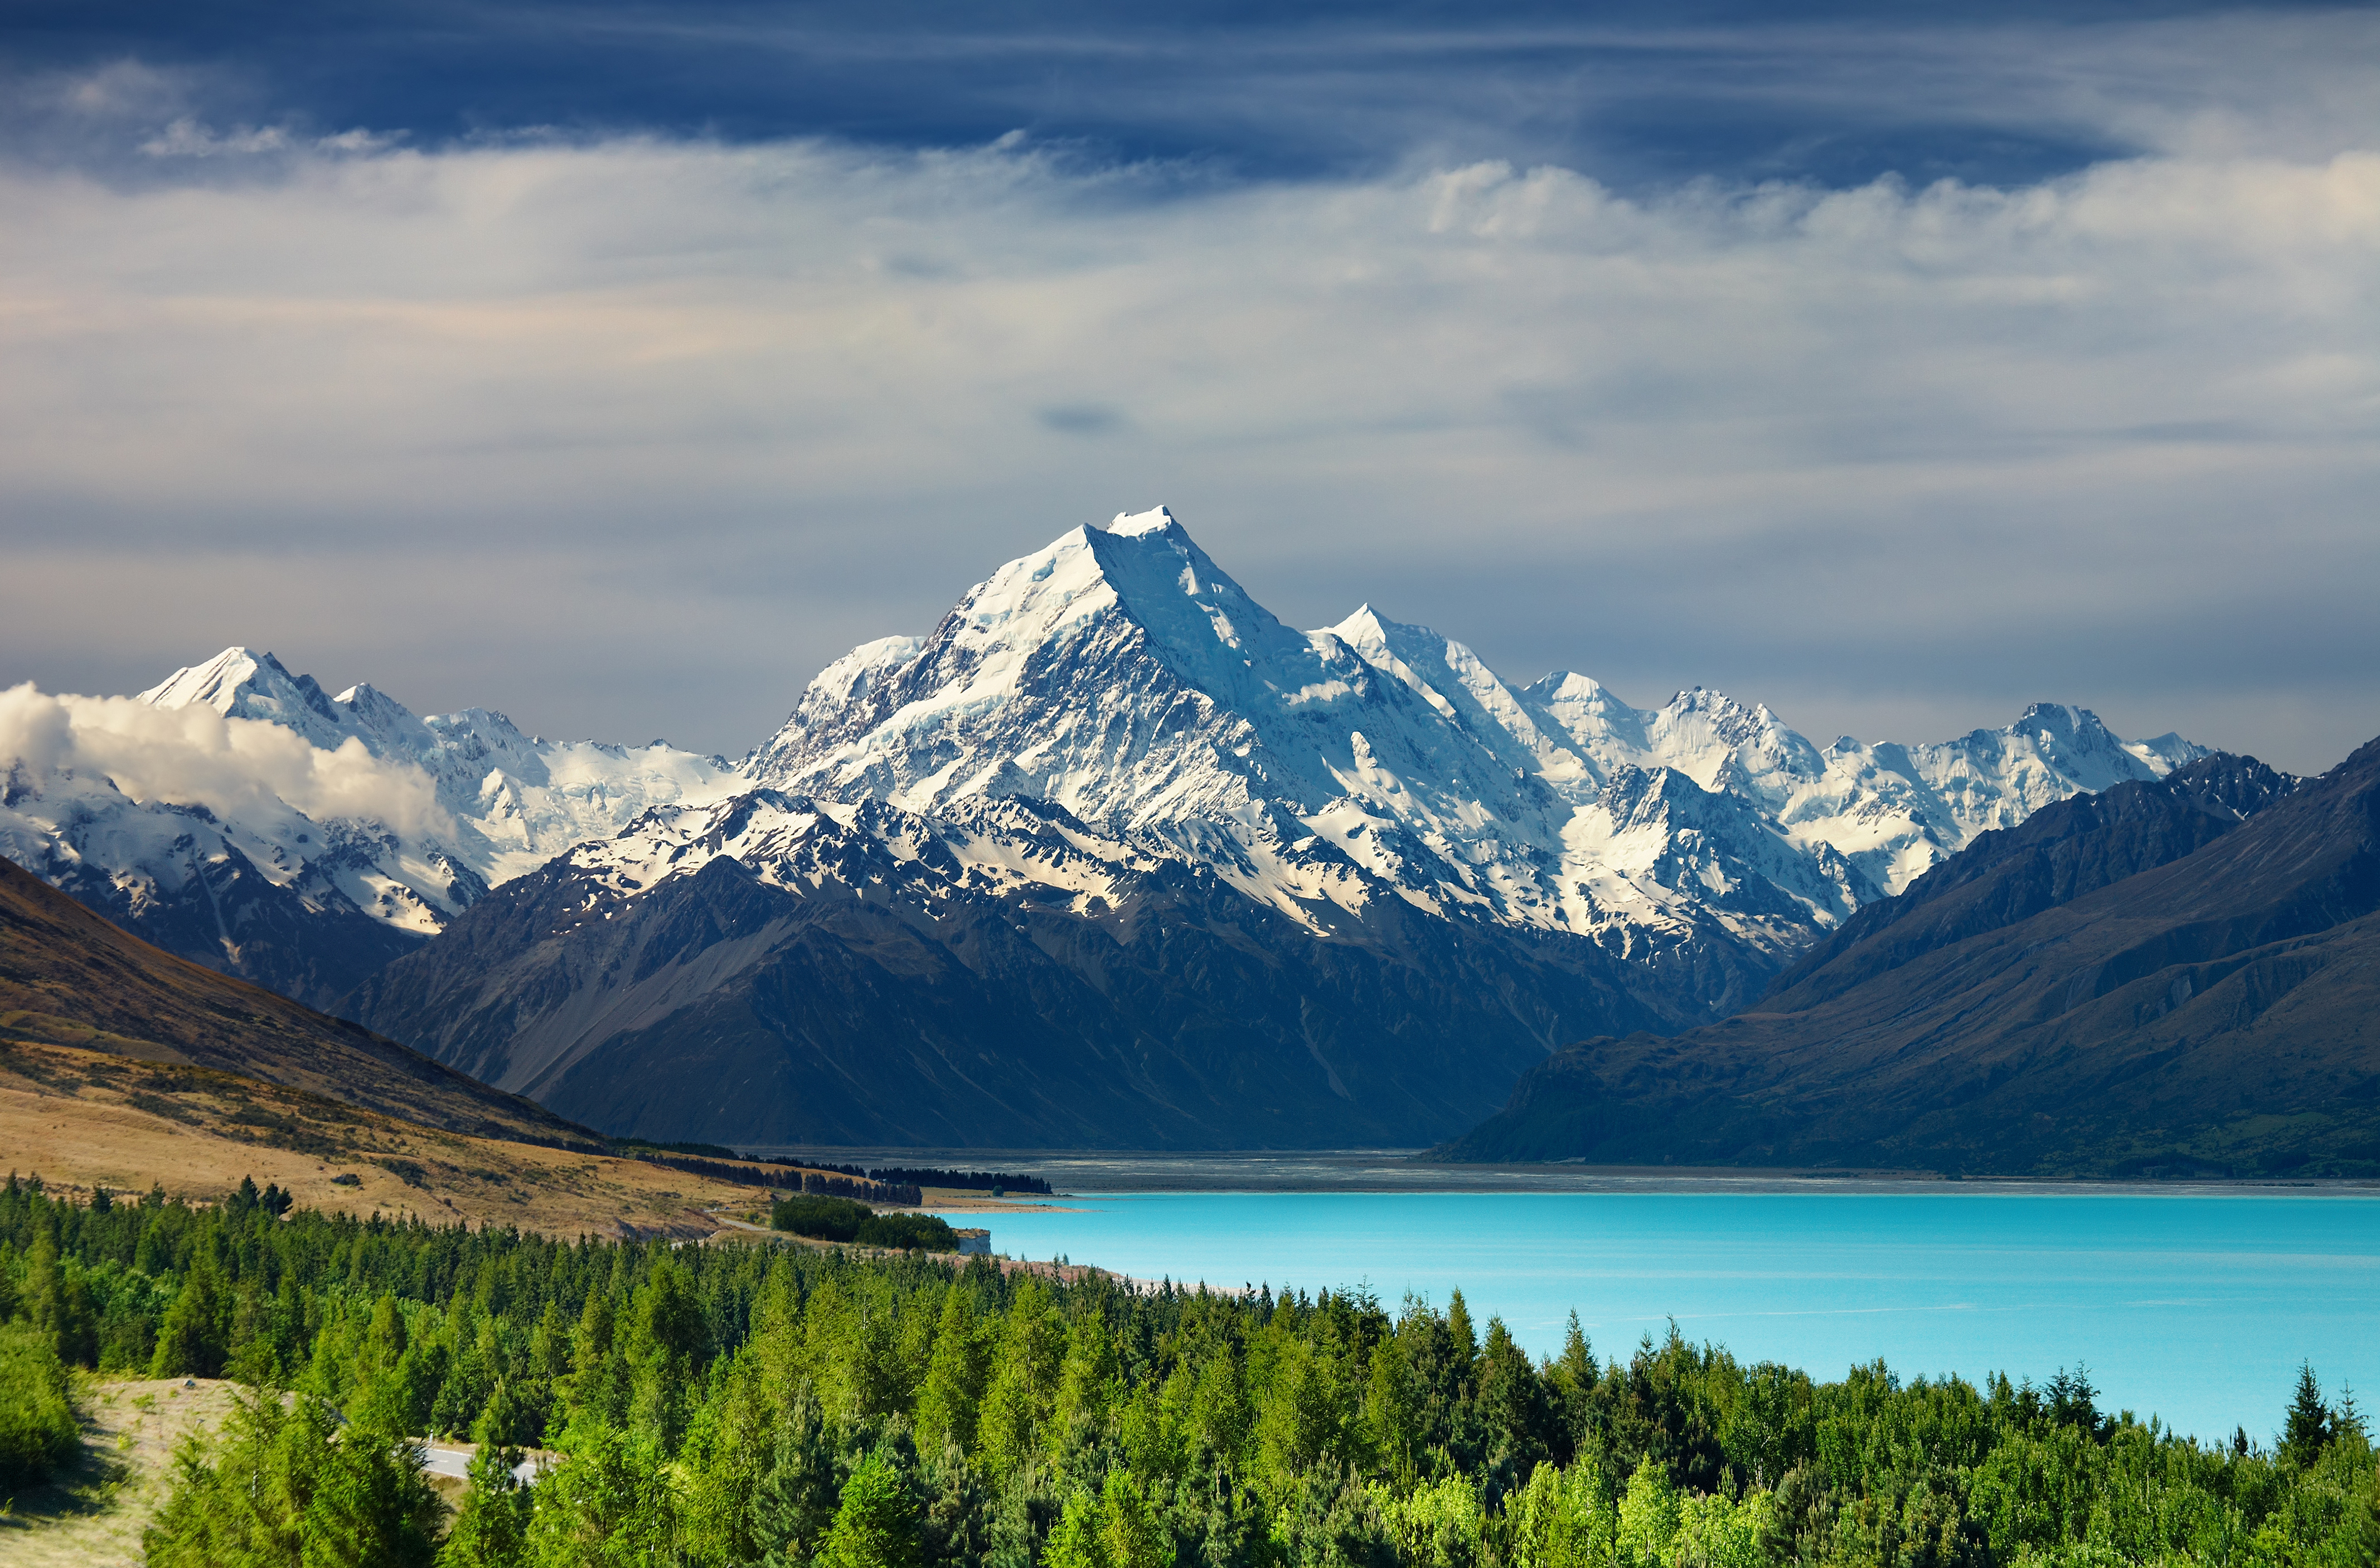 Consider a 15 Day Australia and New Zealand Vacation - Mount Cook in New Zealand